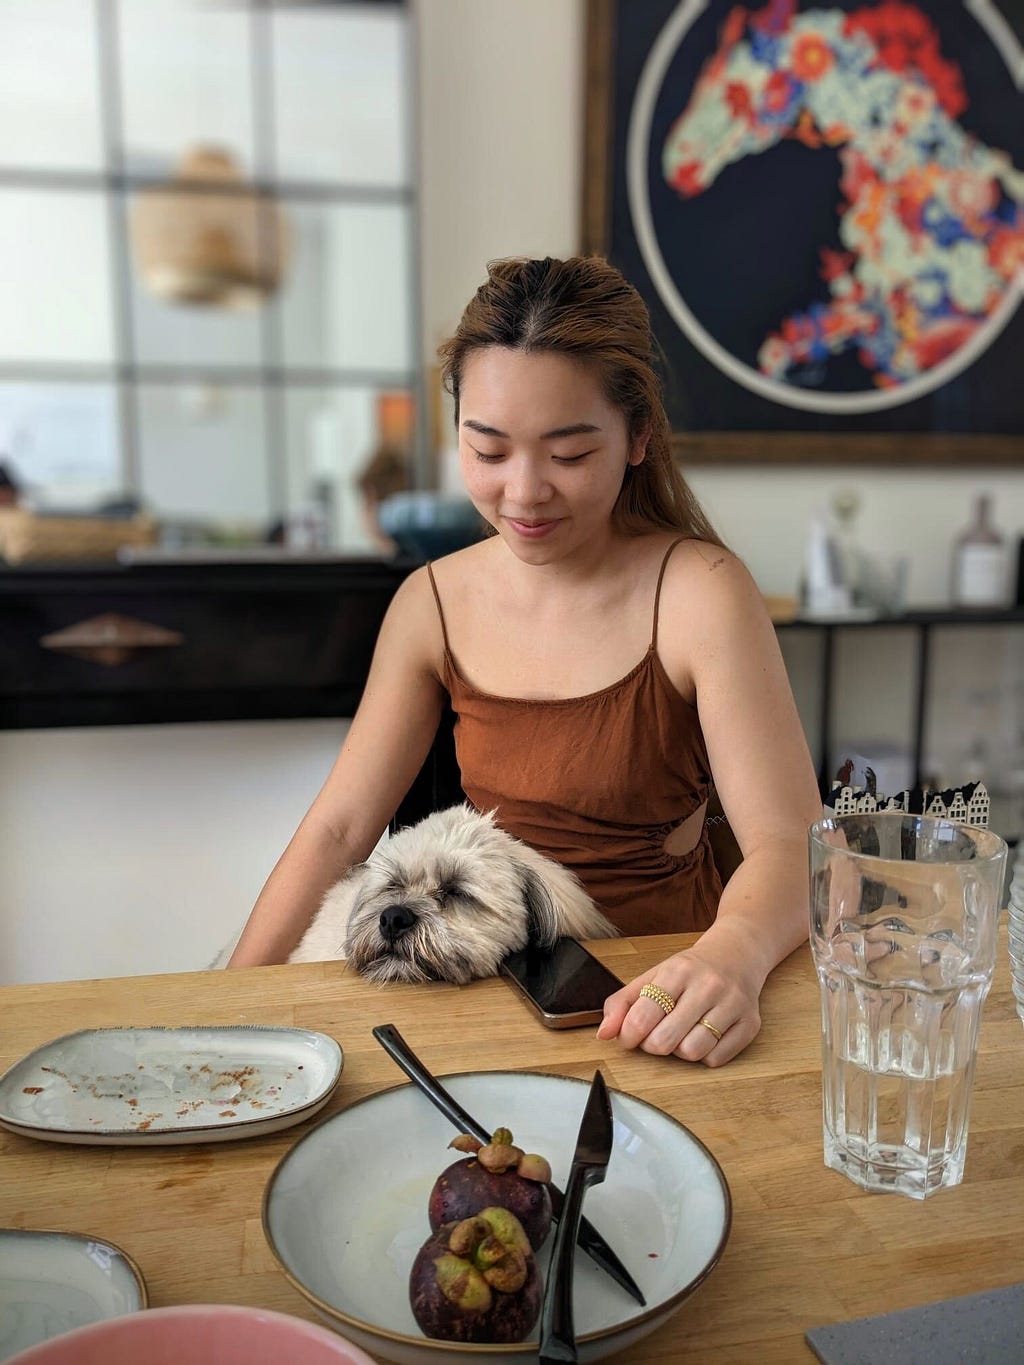 Michelle with a dog on her lap, sitting at a dining table